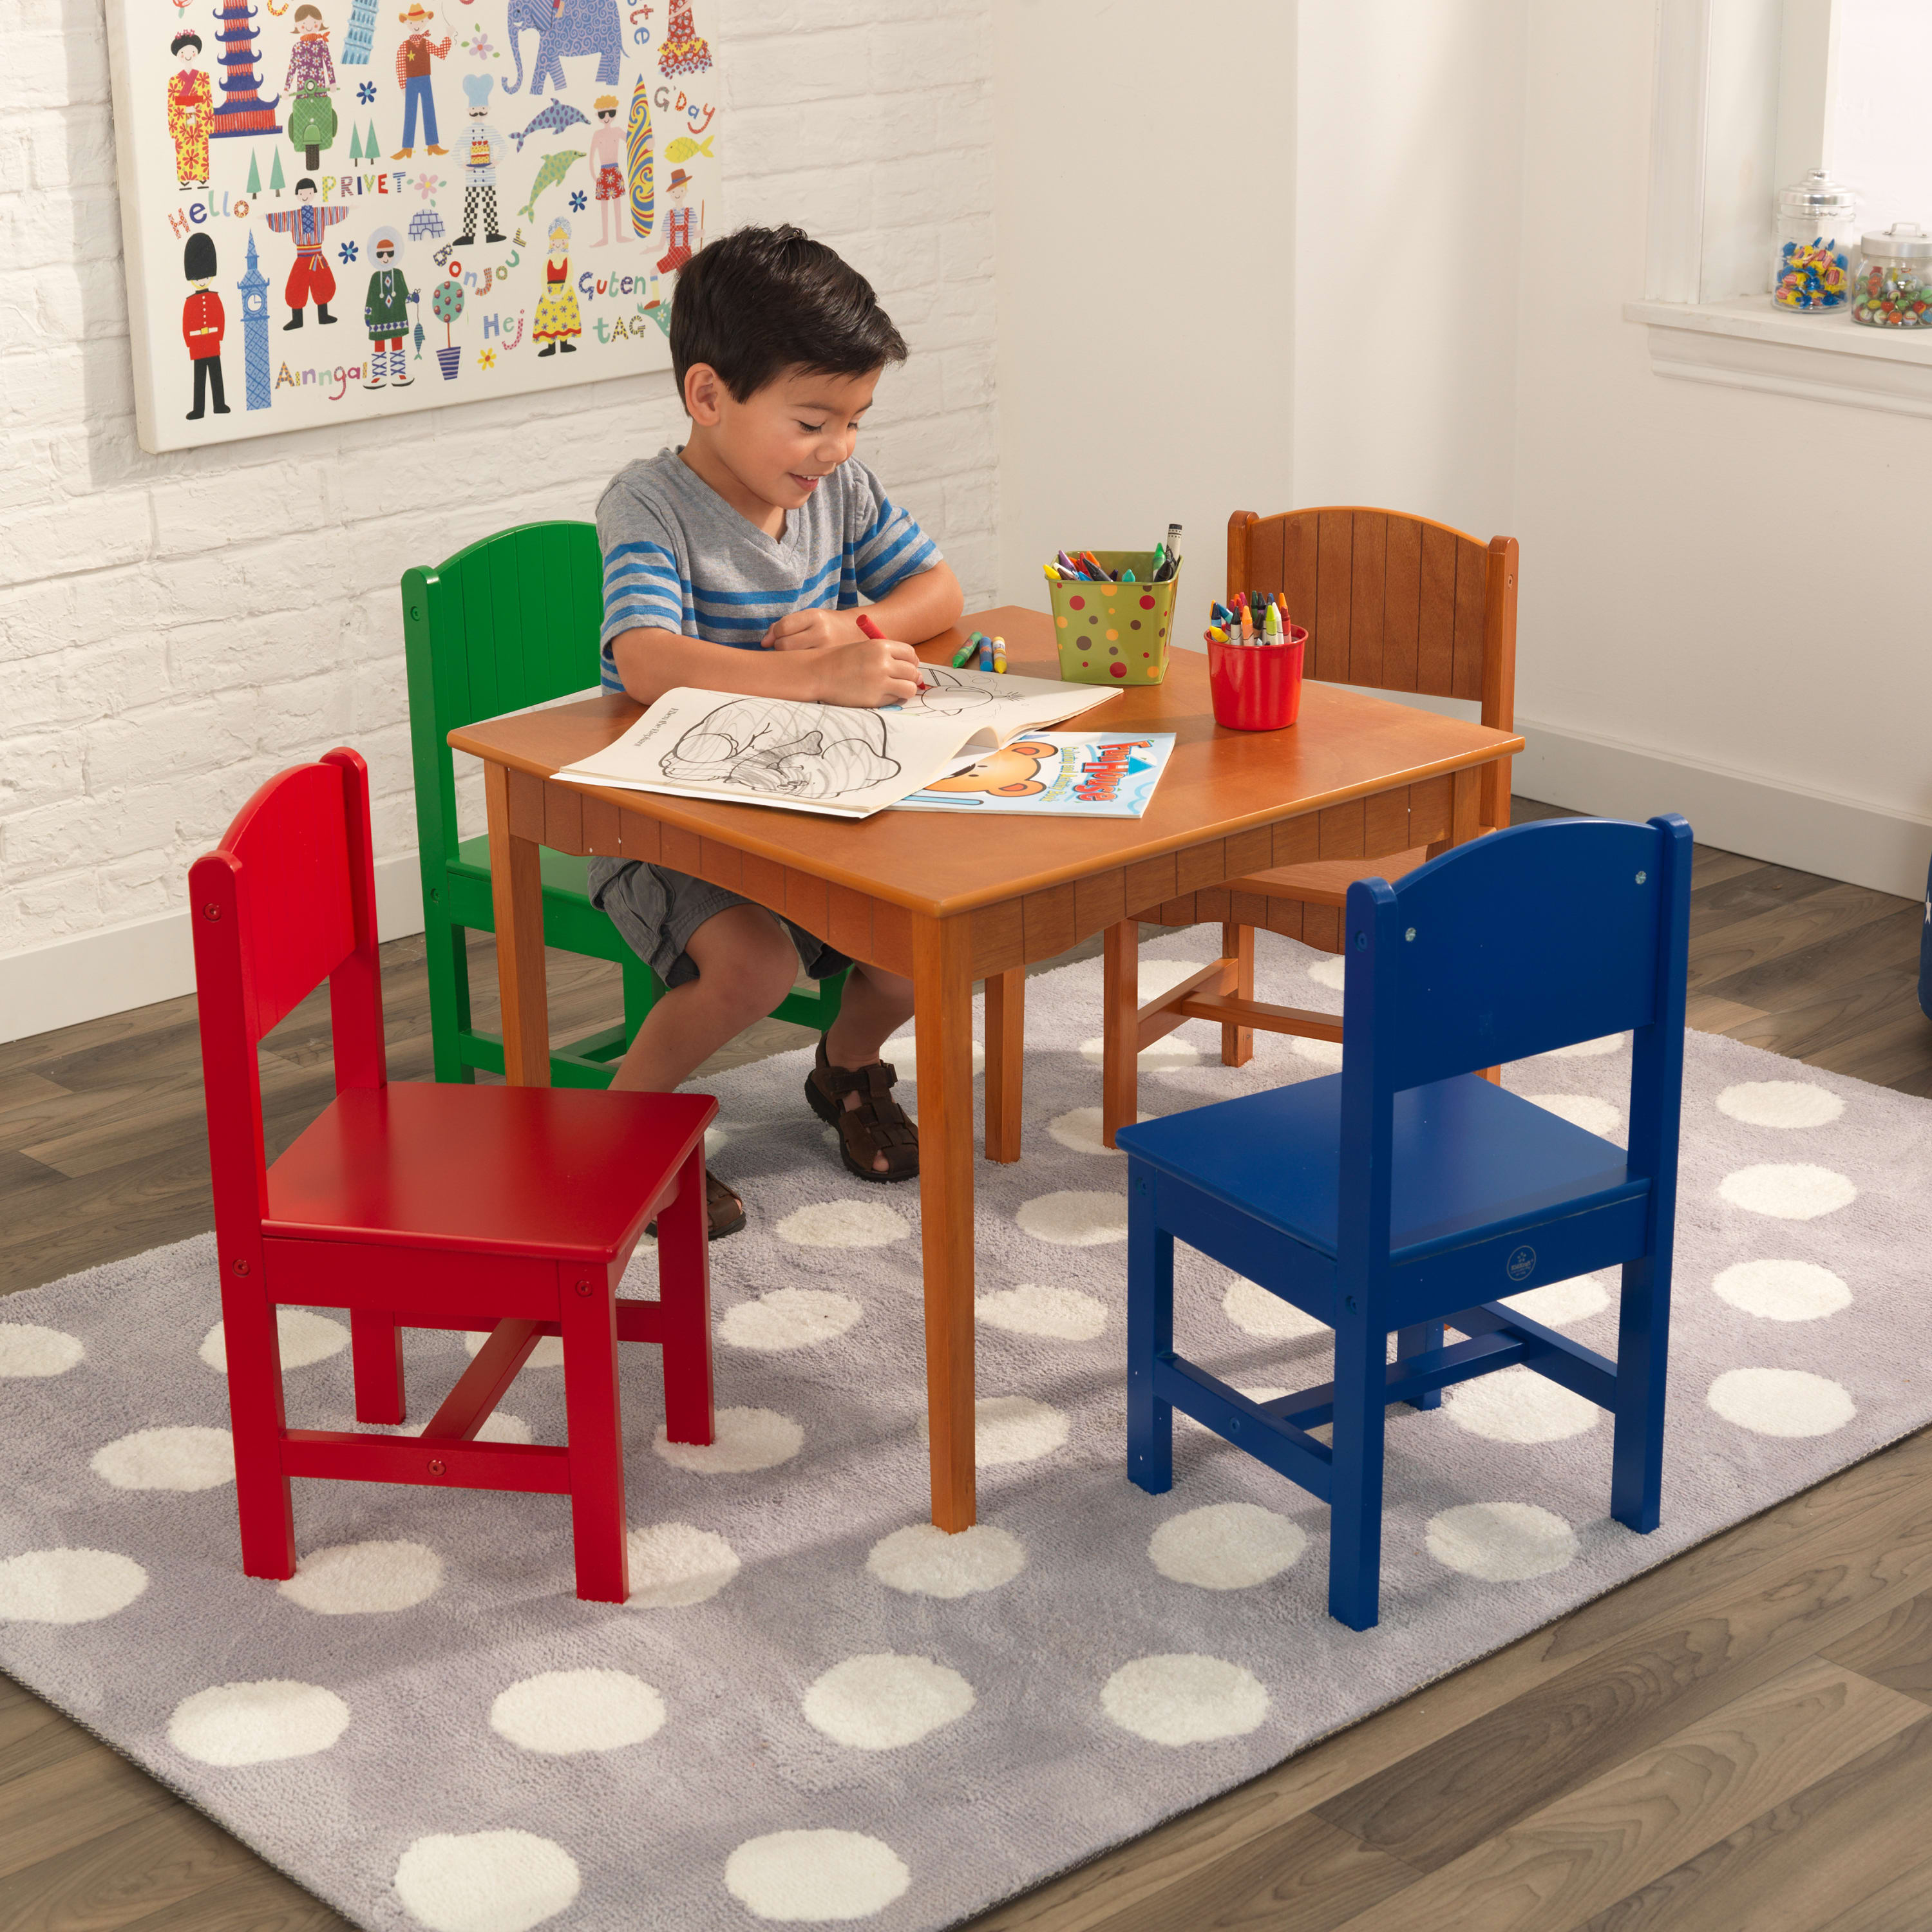 KidKraft Nantucket Wooden Table & 4 Chair Set, Primary Colors - image 2 of 7